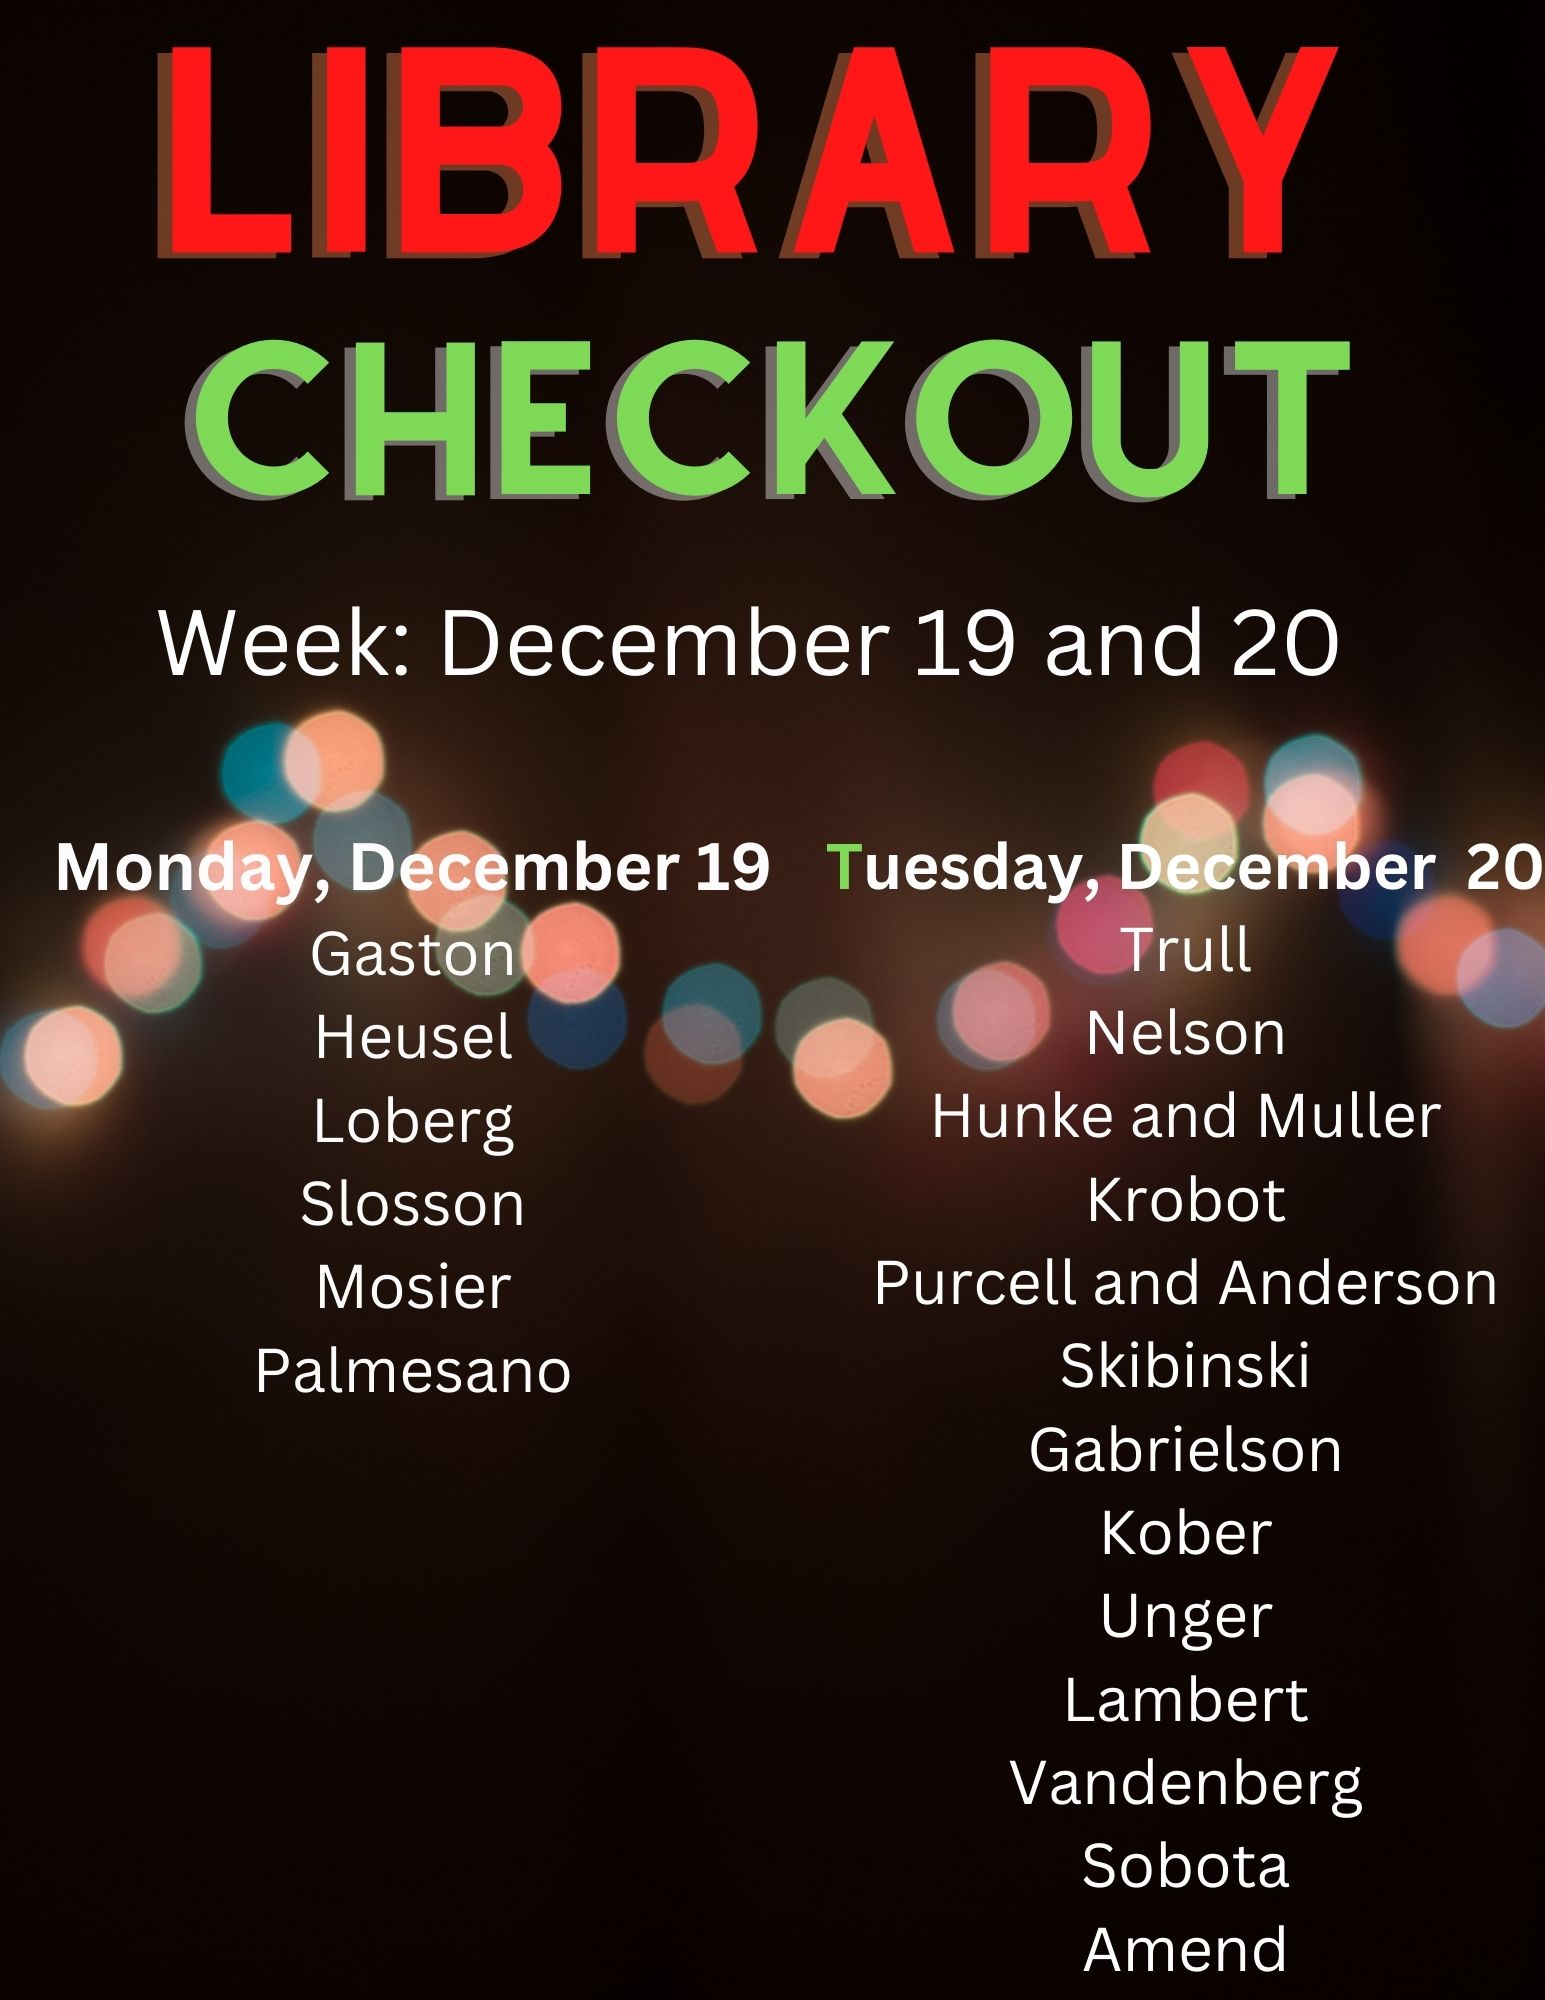 Library checkout schedule